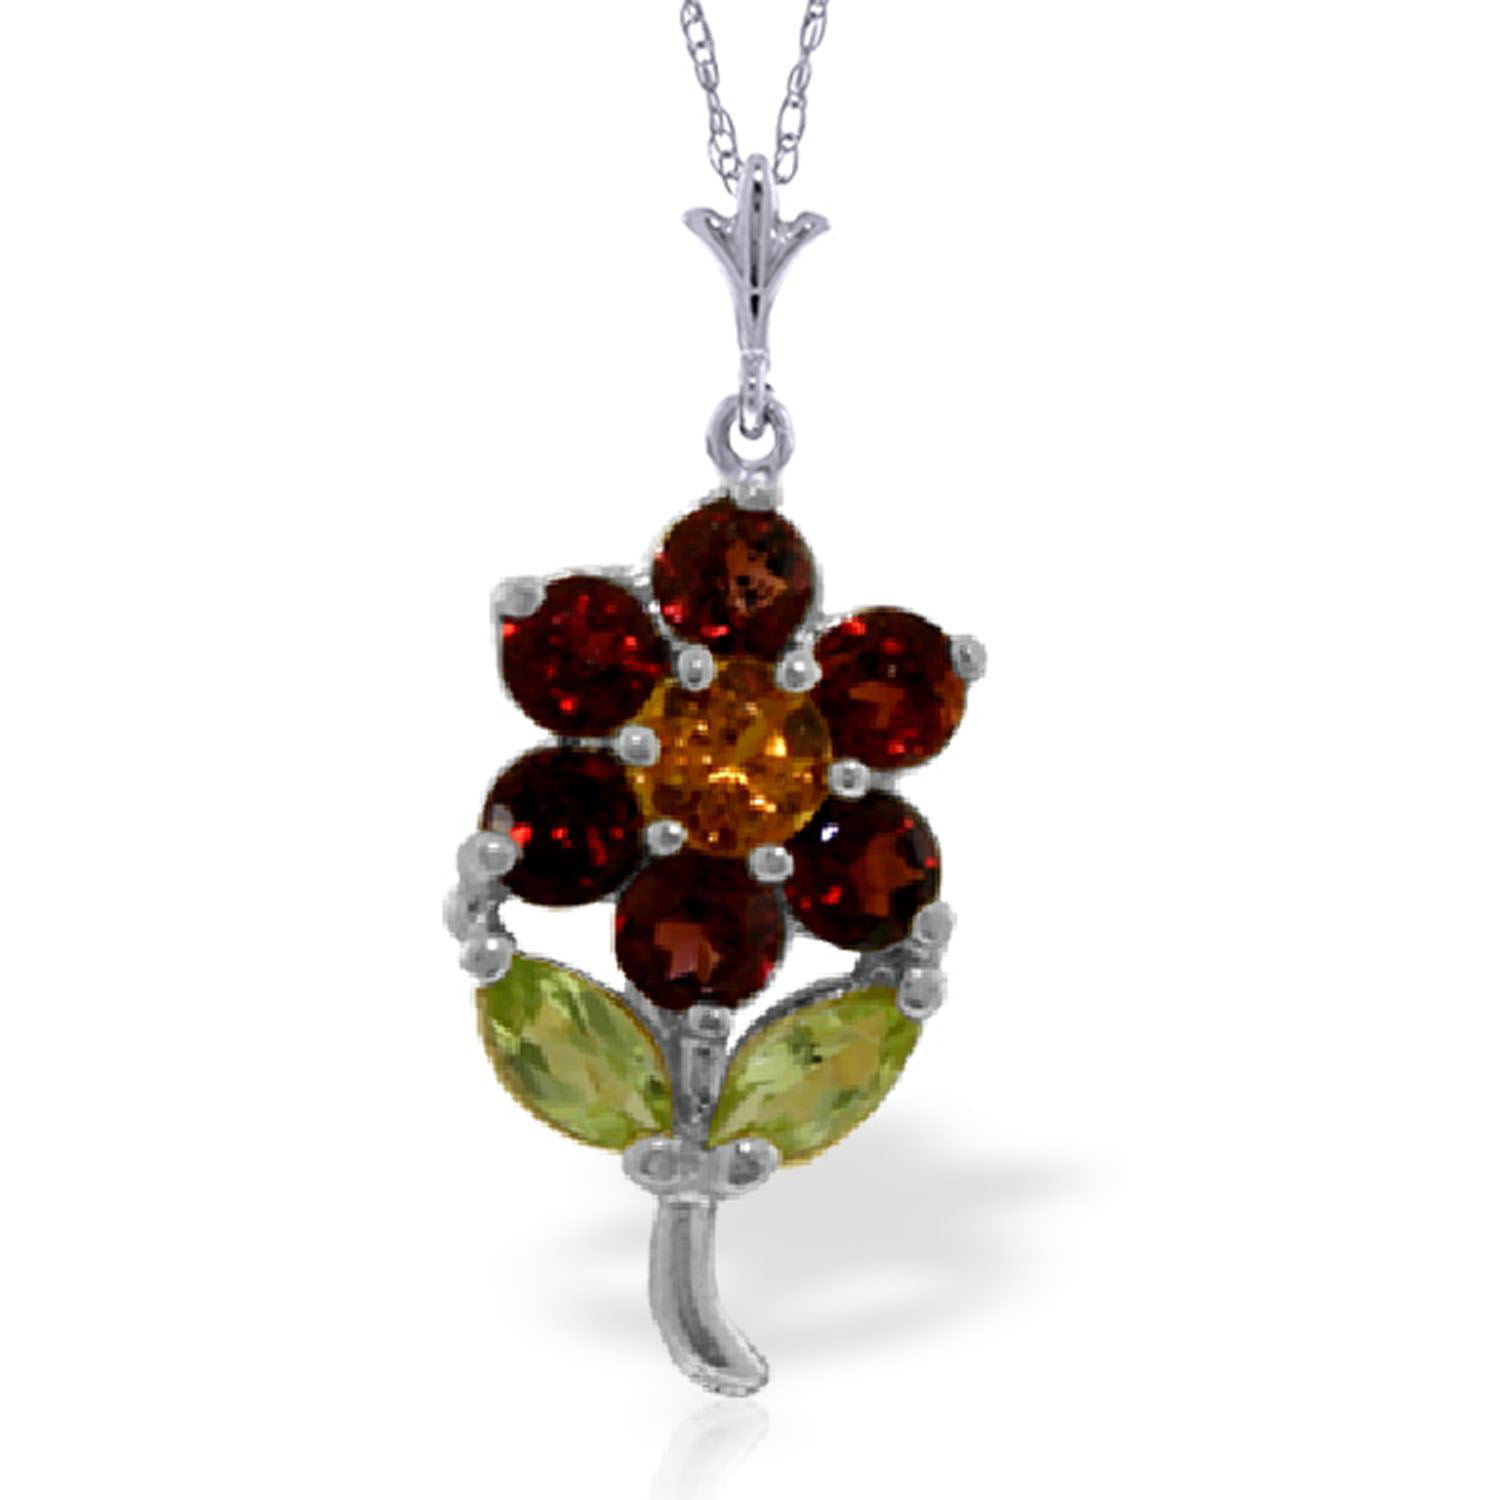 ALARRI 14K Solid Rose Gold Necklace w/ Garnets & Peridots with 24 Inch Chain Length